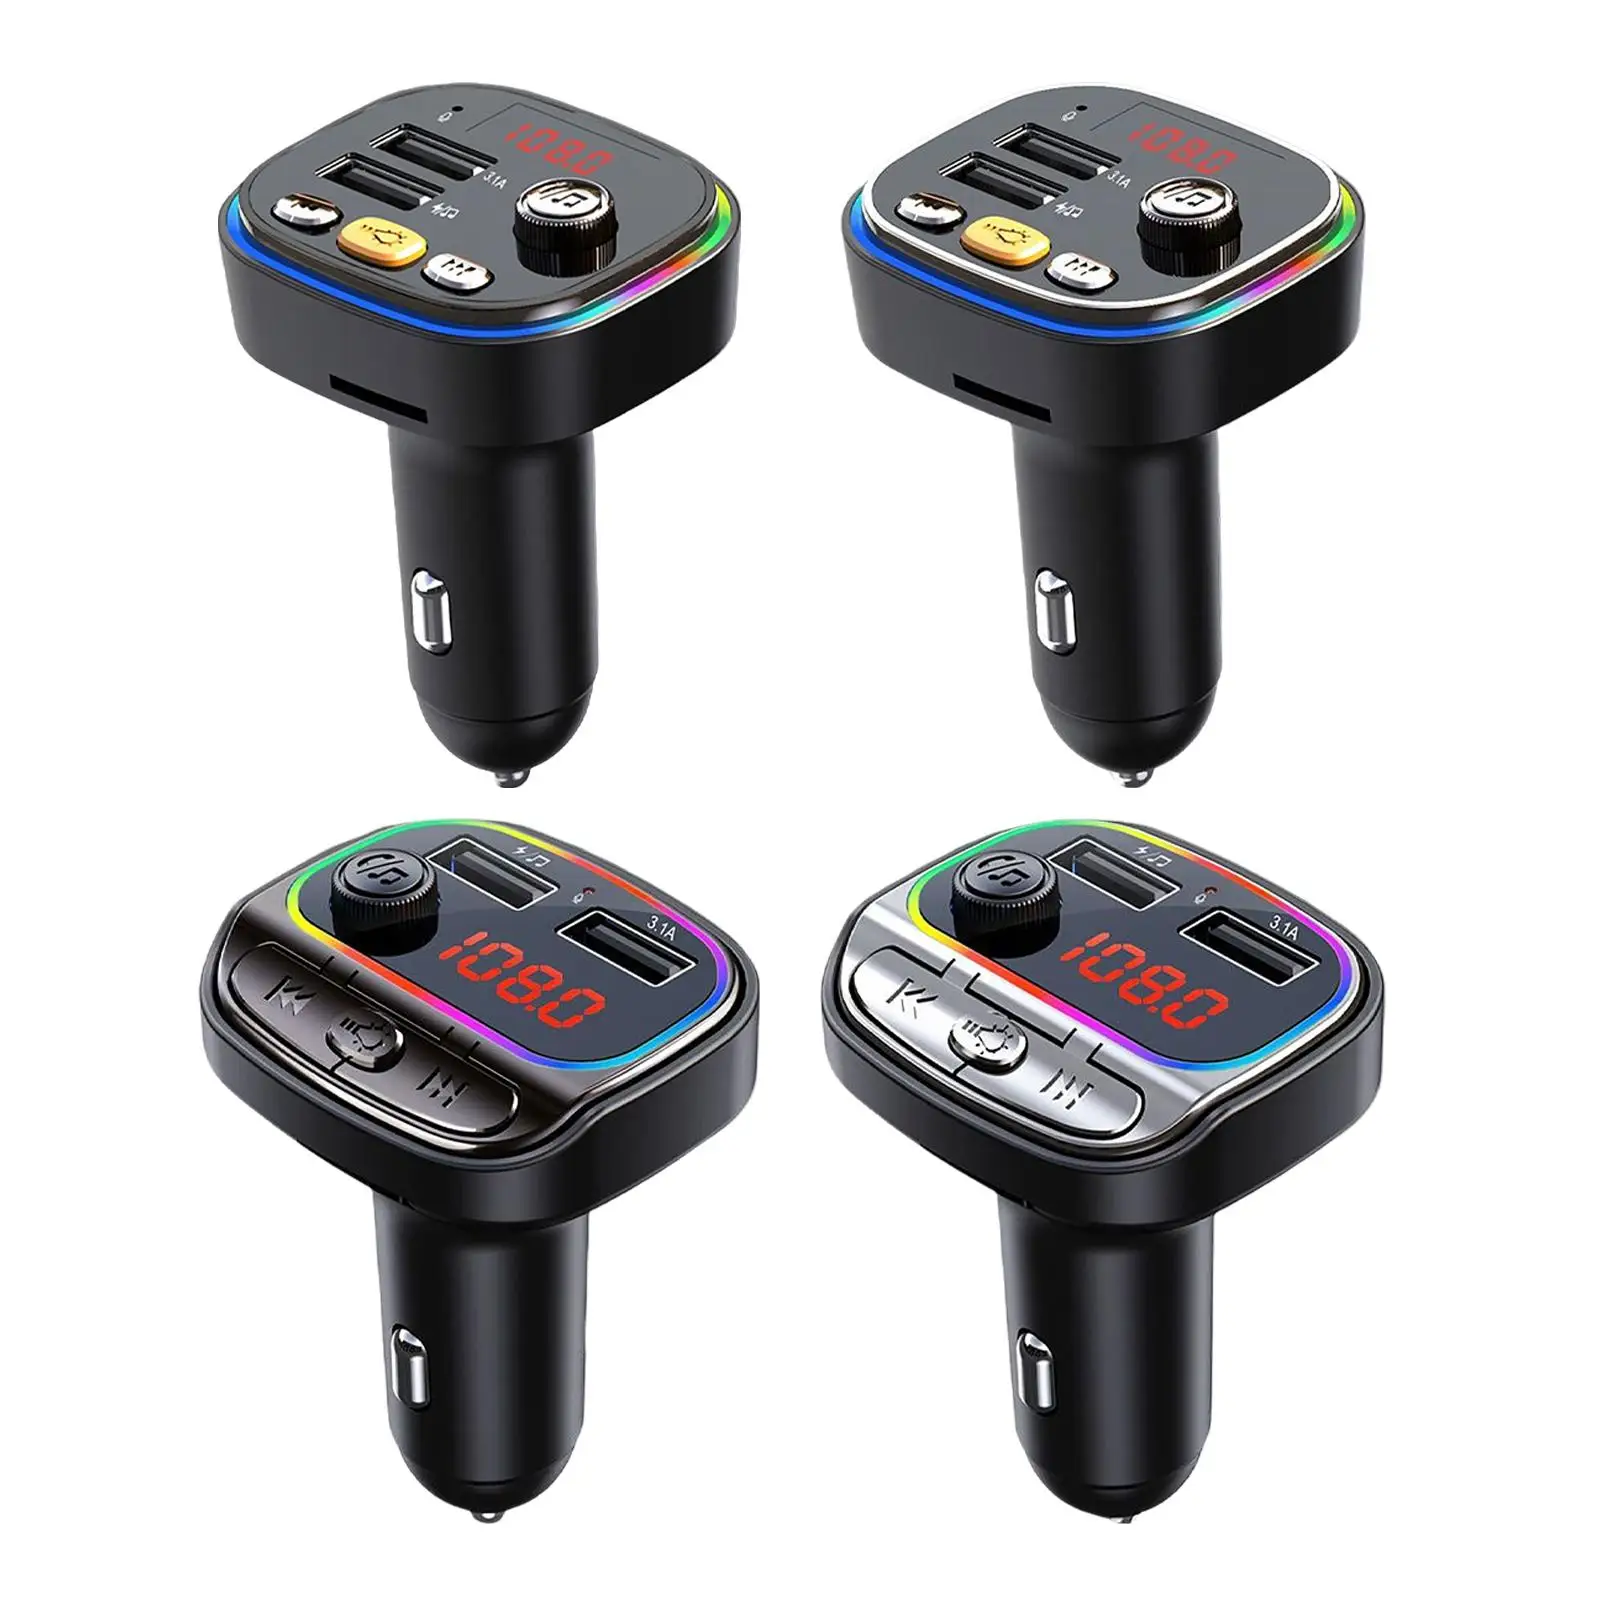 USB Flash Drive MP3 Music Player & 2 USB Ports Charger 1 Pc Bluetooth FM Transmitter Car Wireless Bluetooth FM Radio Adapter Support Hands-Free Calling 